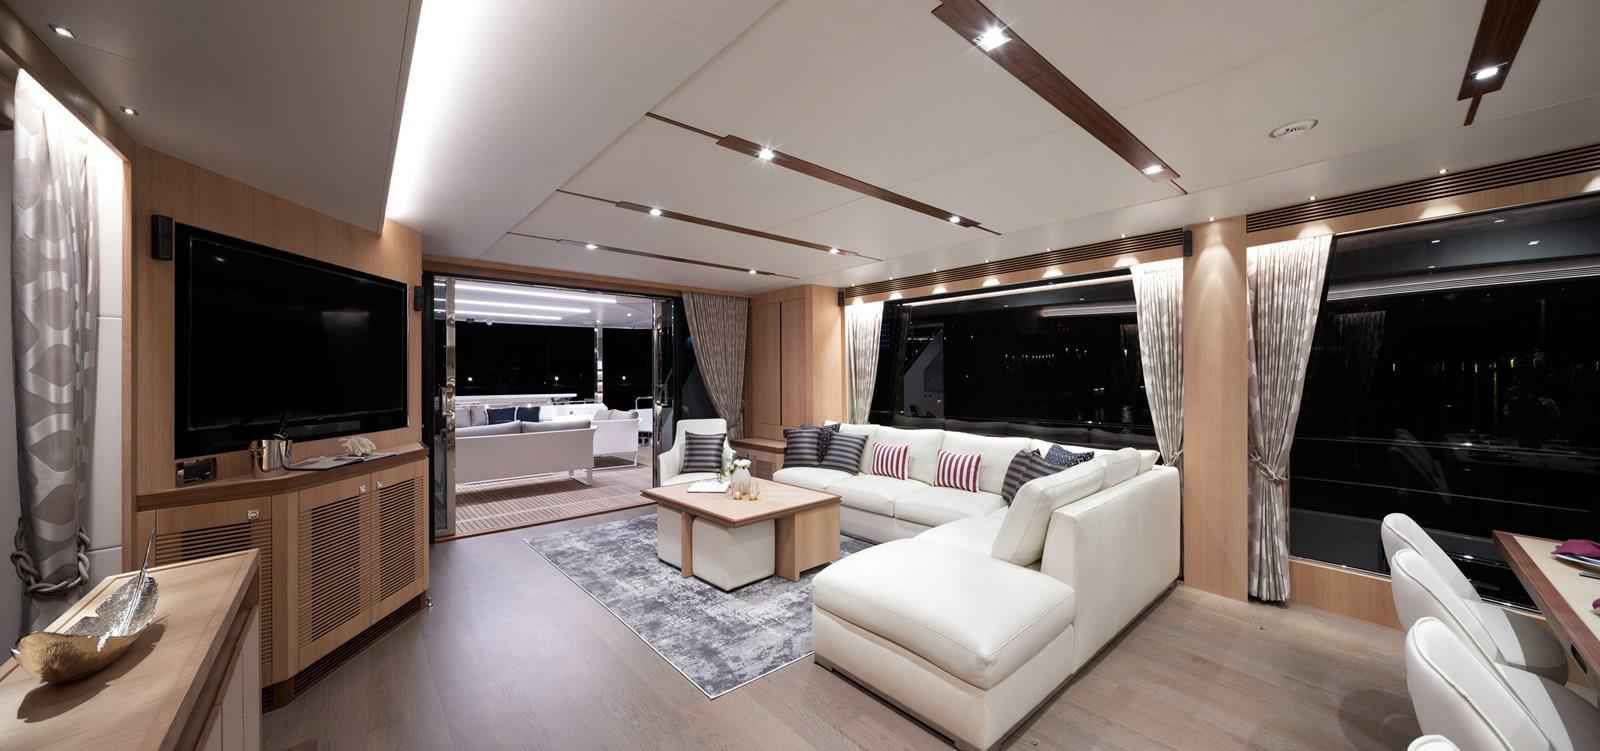 FD87 Aqua Life Salon aft view with sofa, coffee table, TV and doors to aft deck.